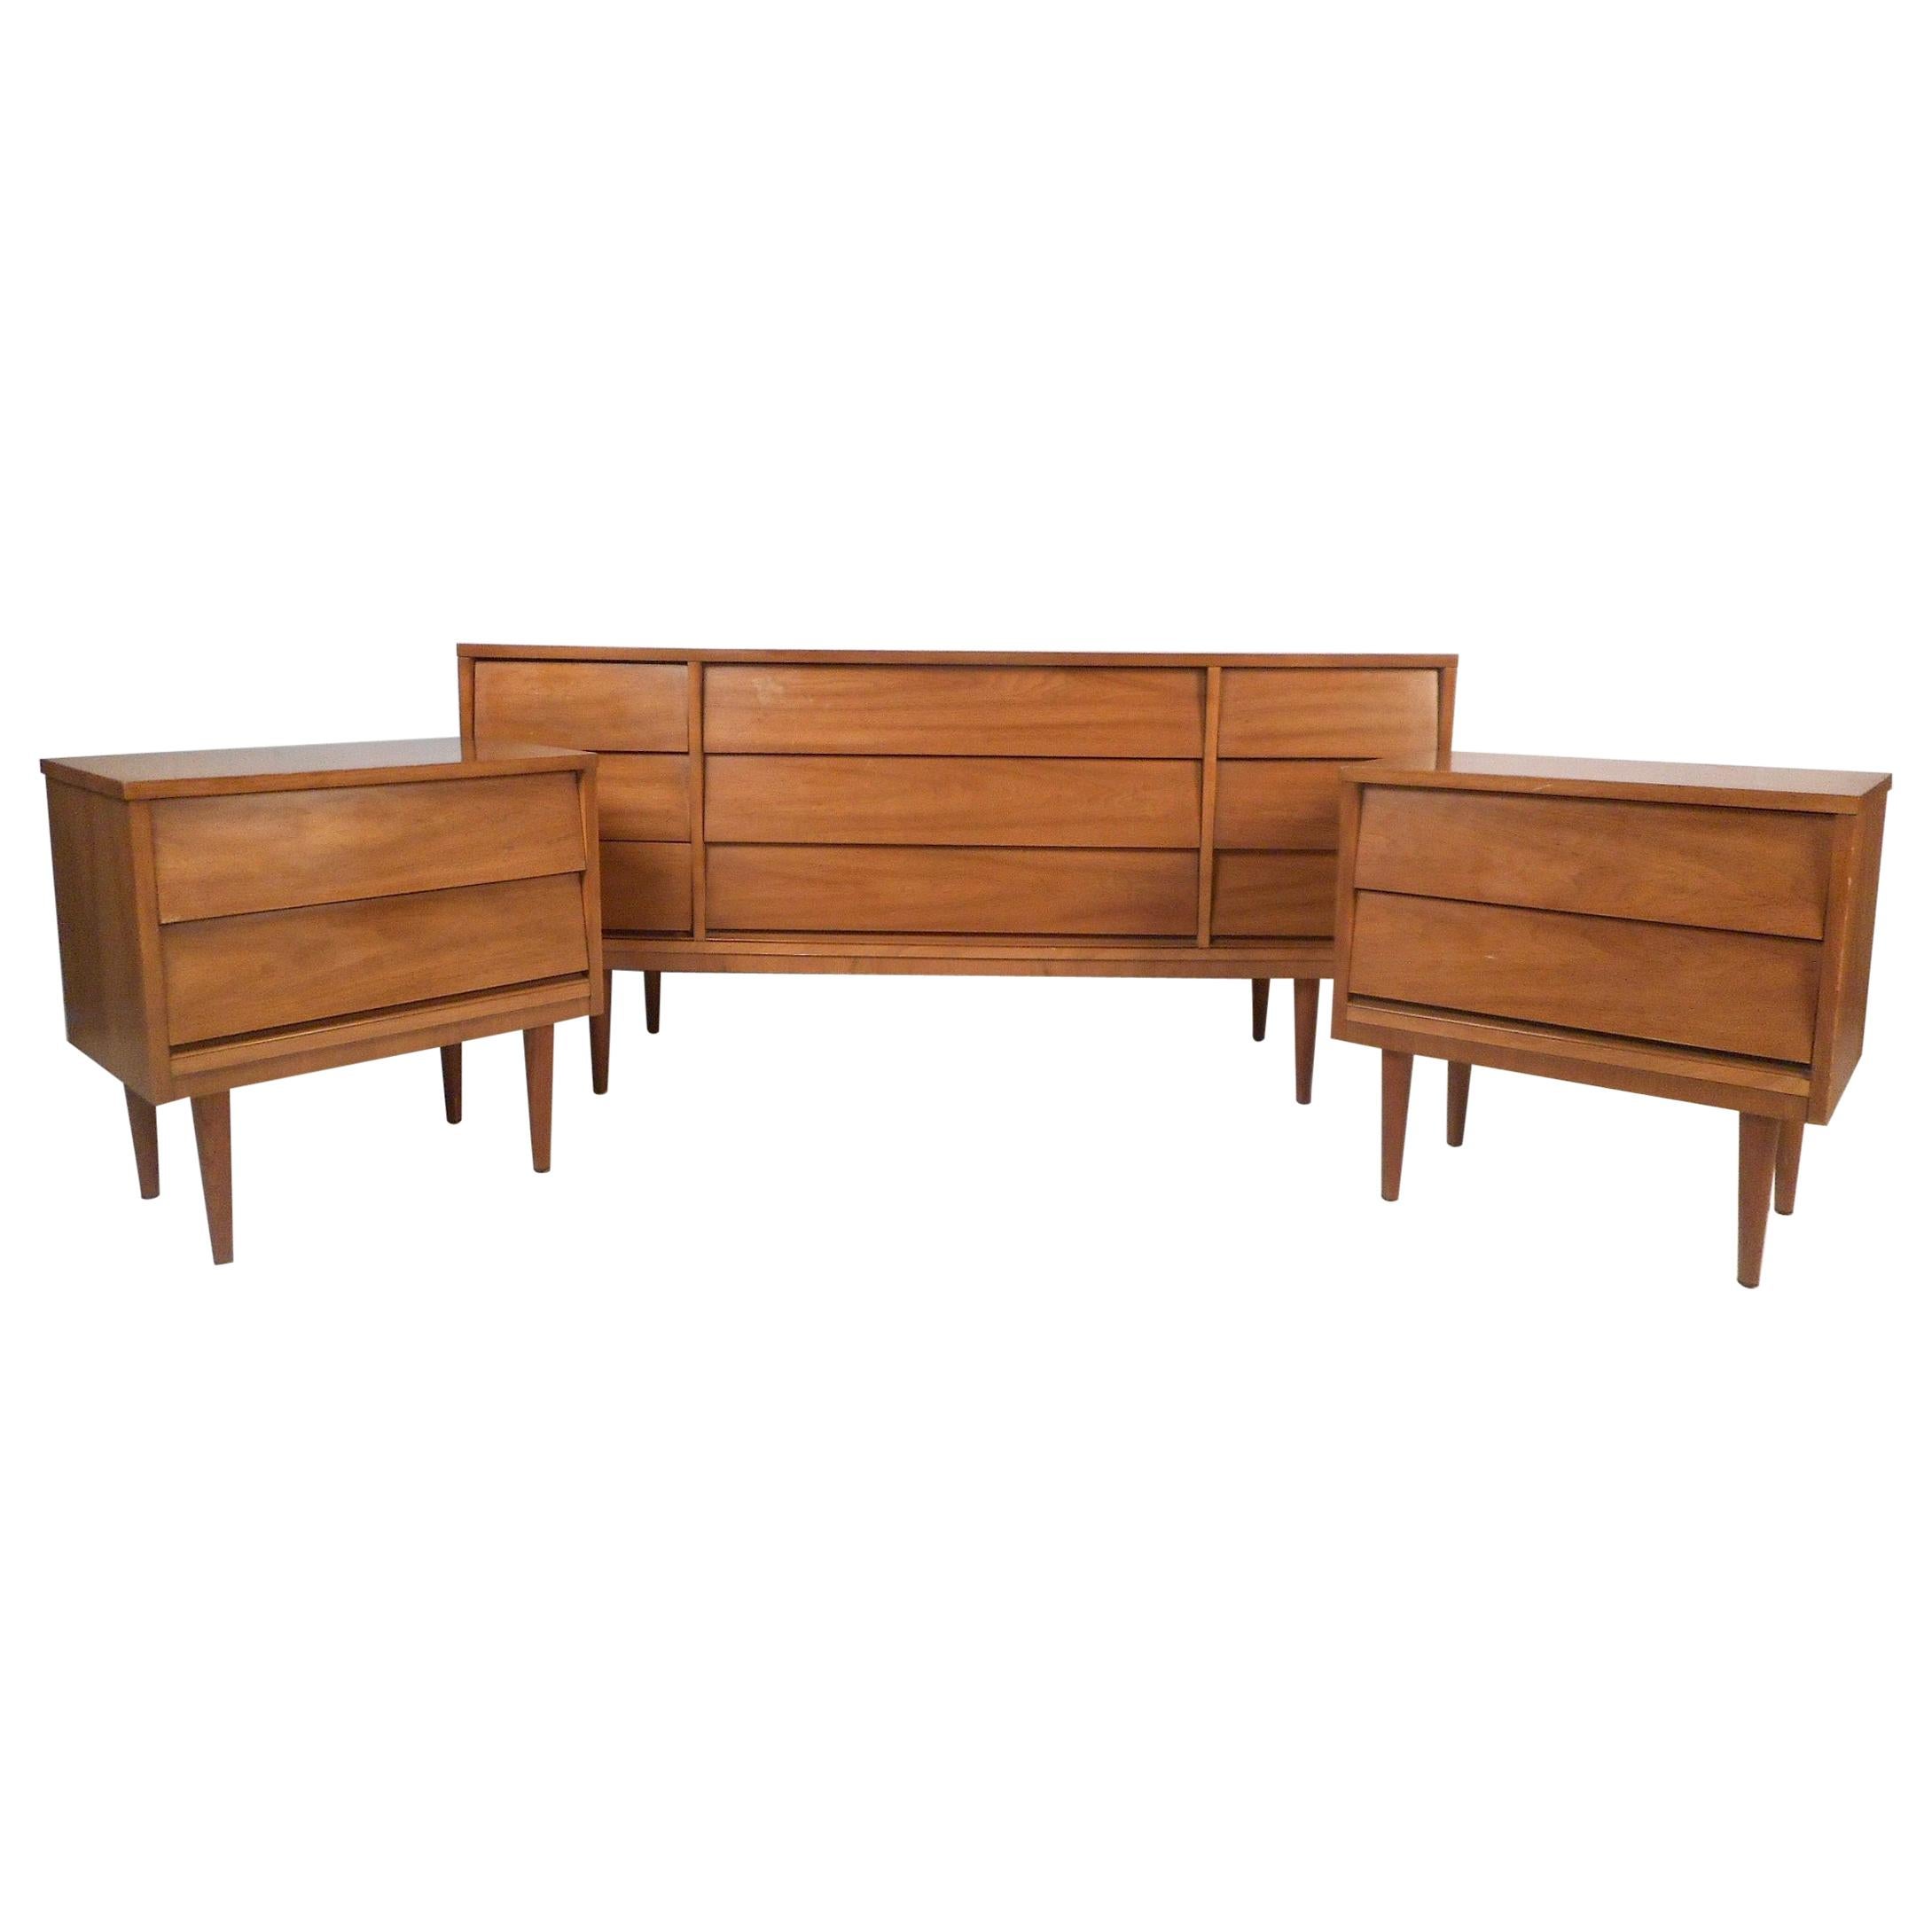 Mid-Century Modern Dresser and Nightstands by Dixie Furniture